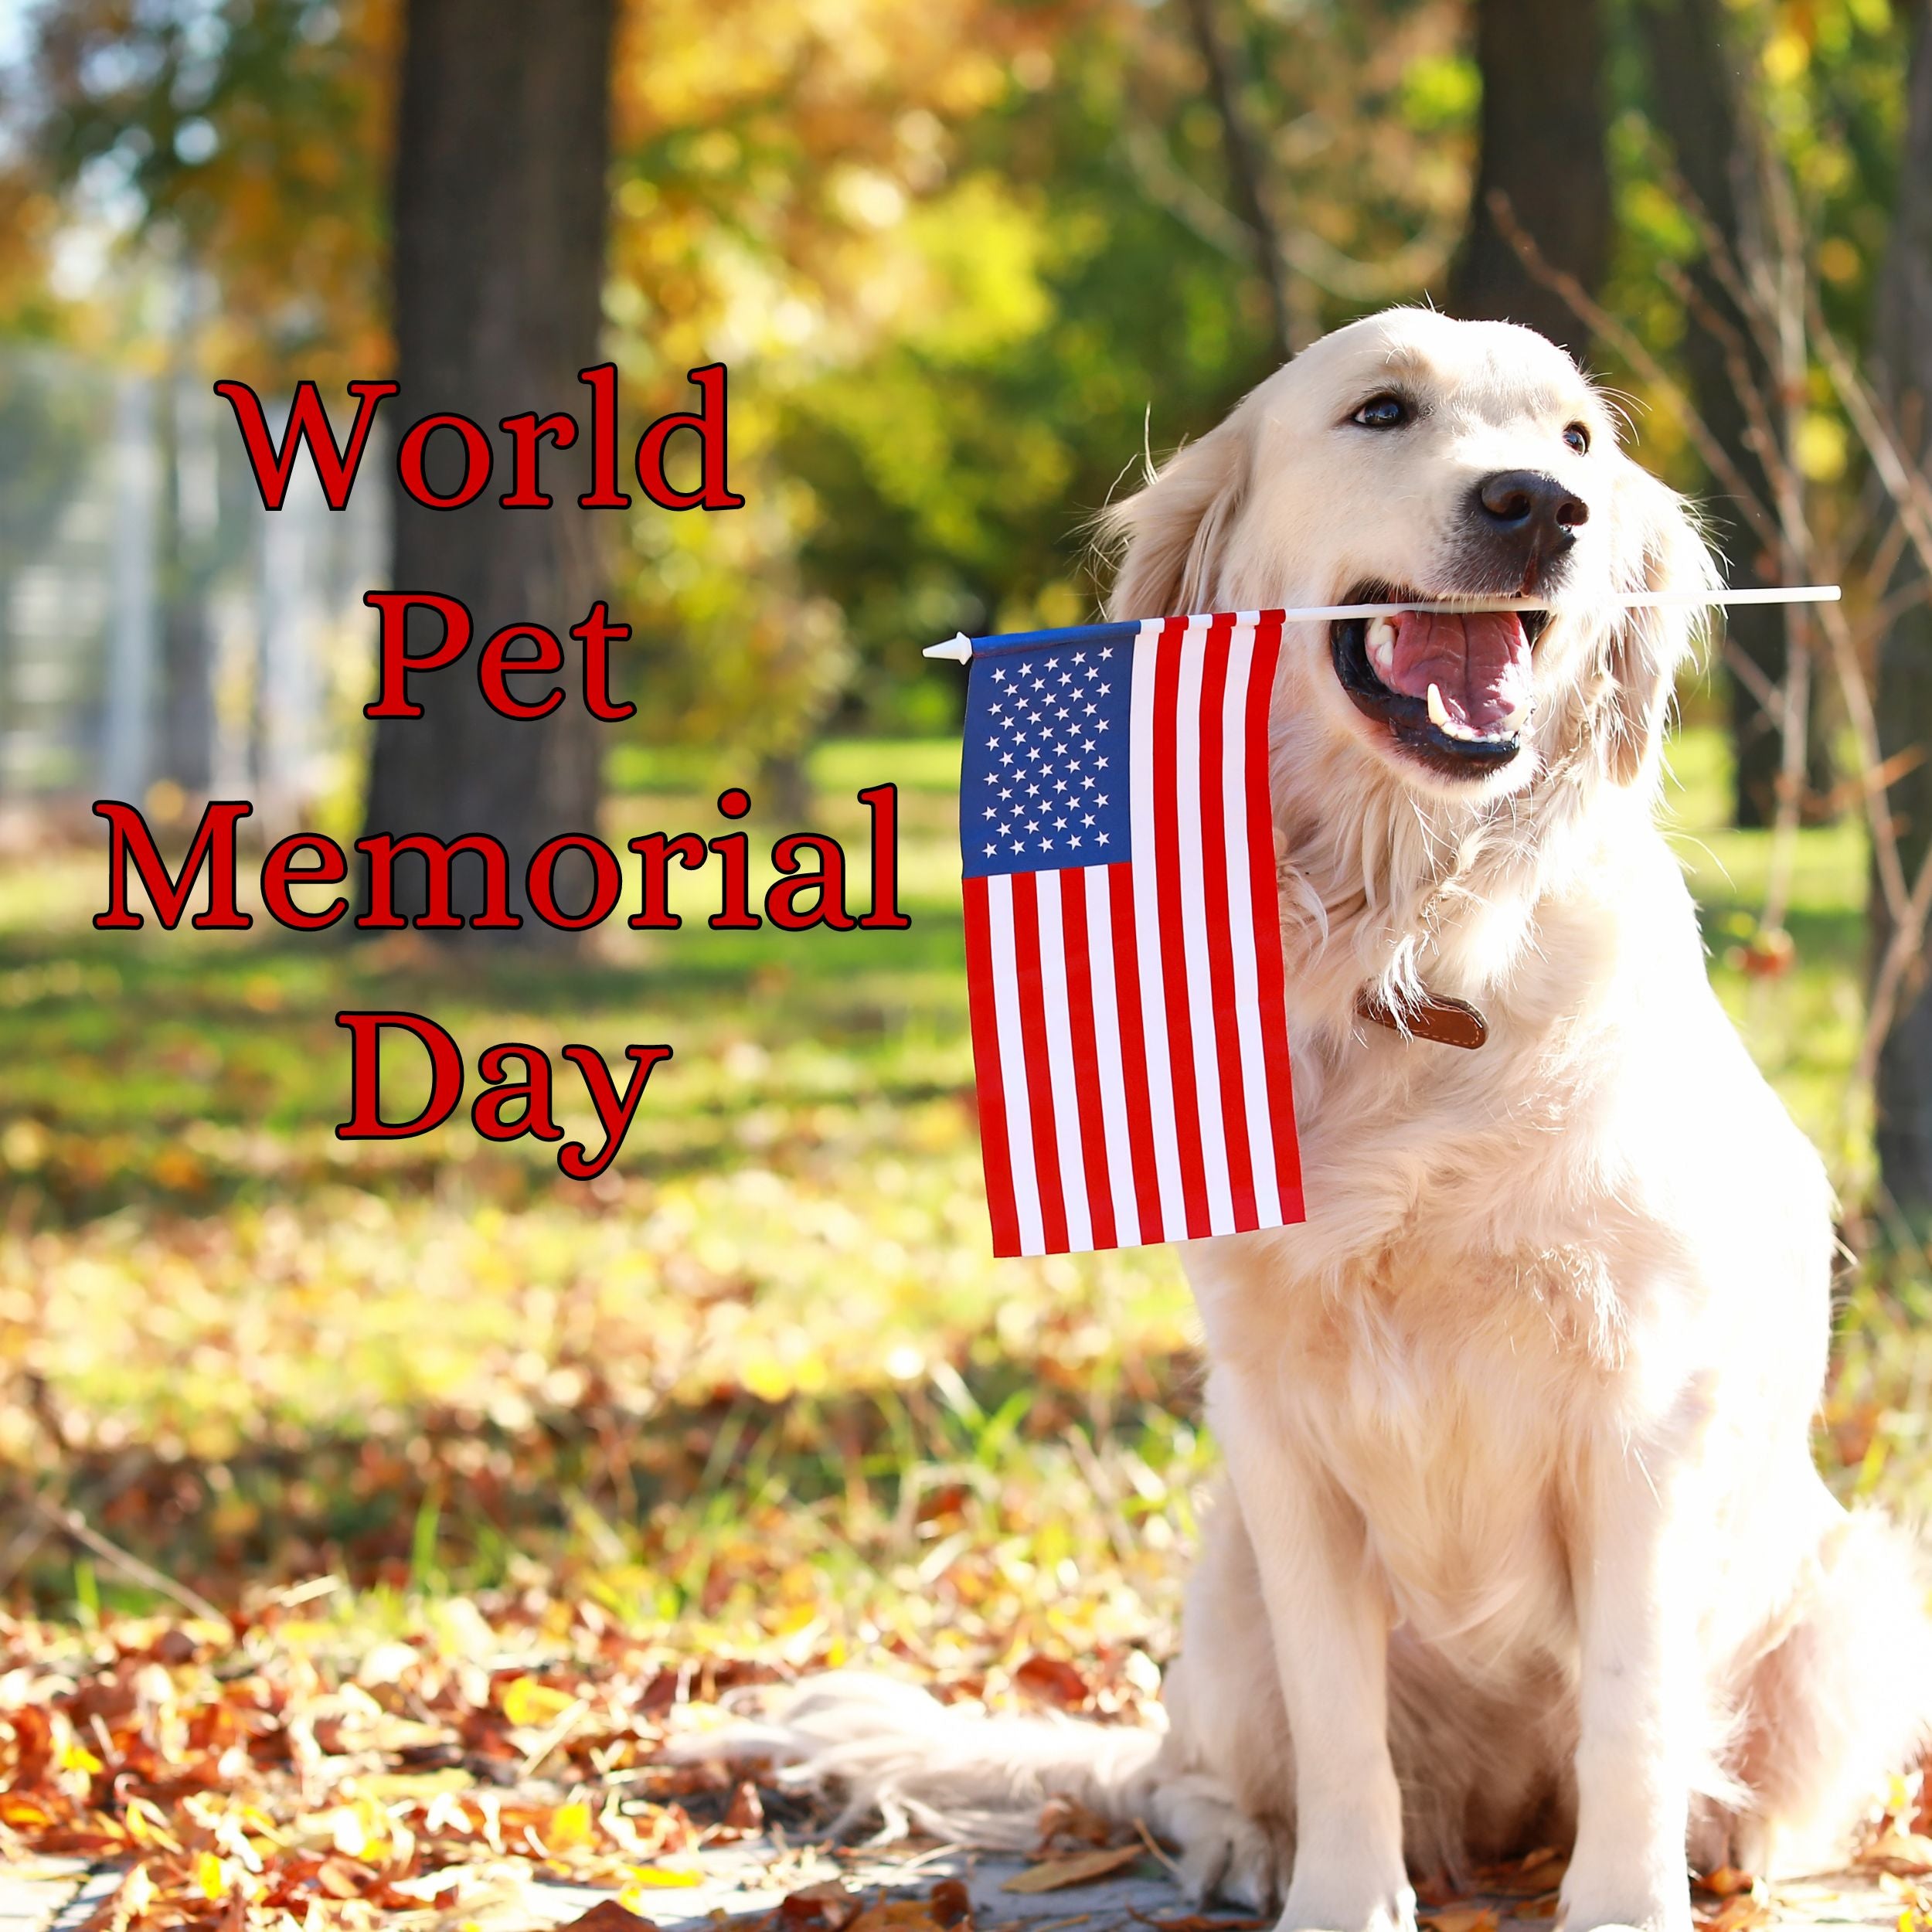 World Pet Memorial Day Honoring the Memory of Our Beloved Companions